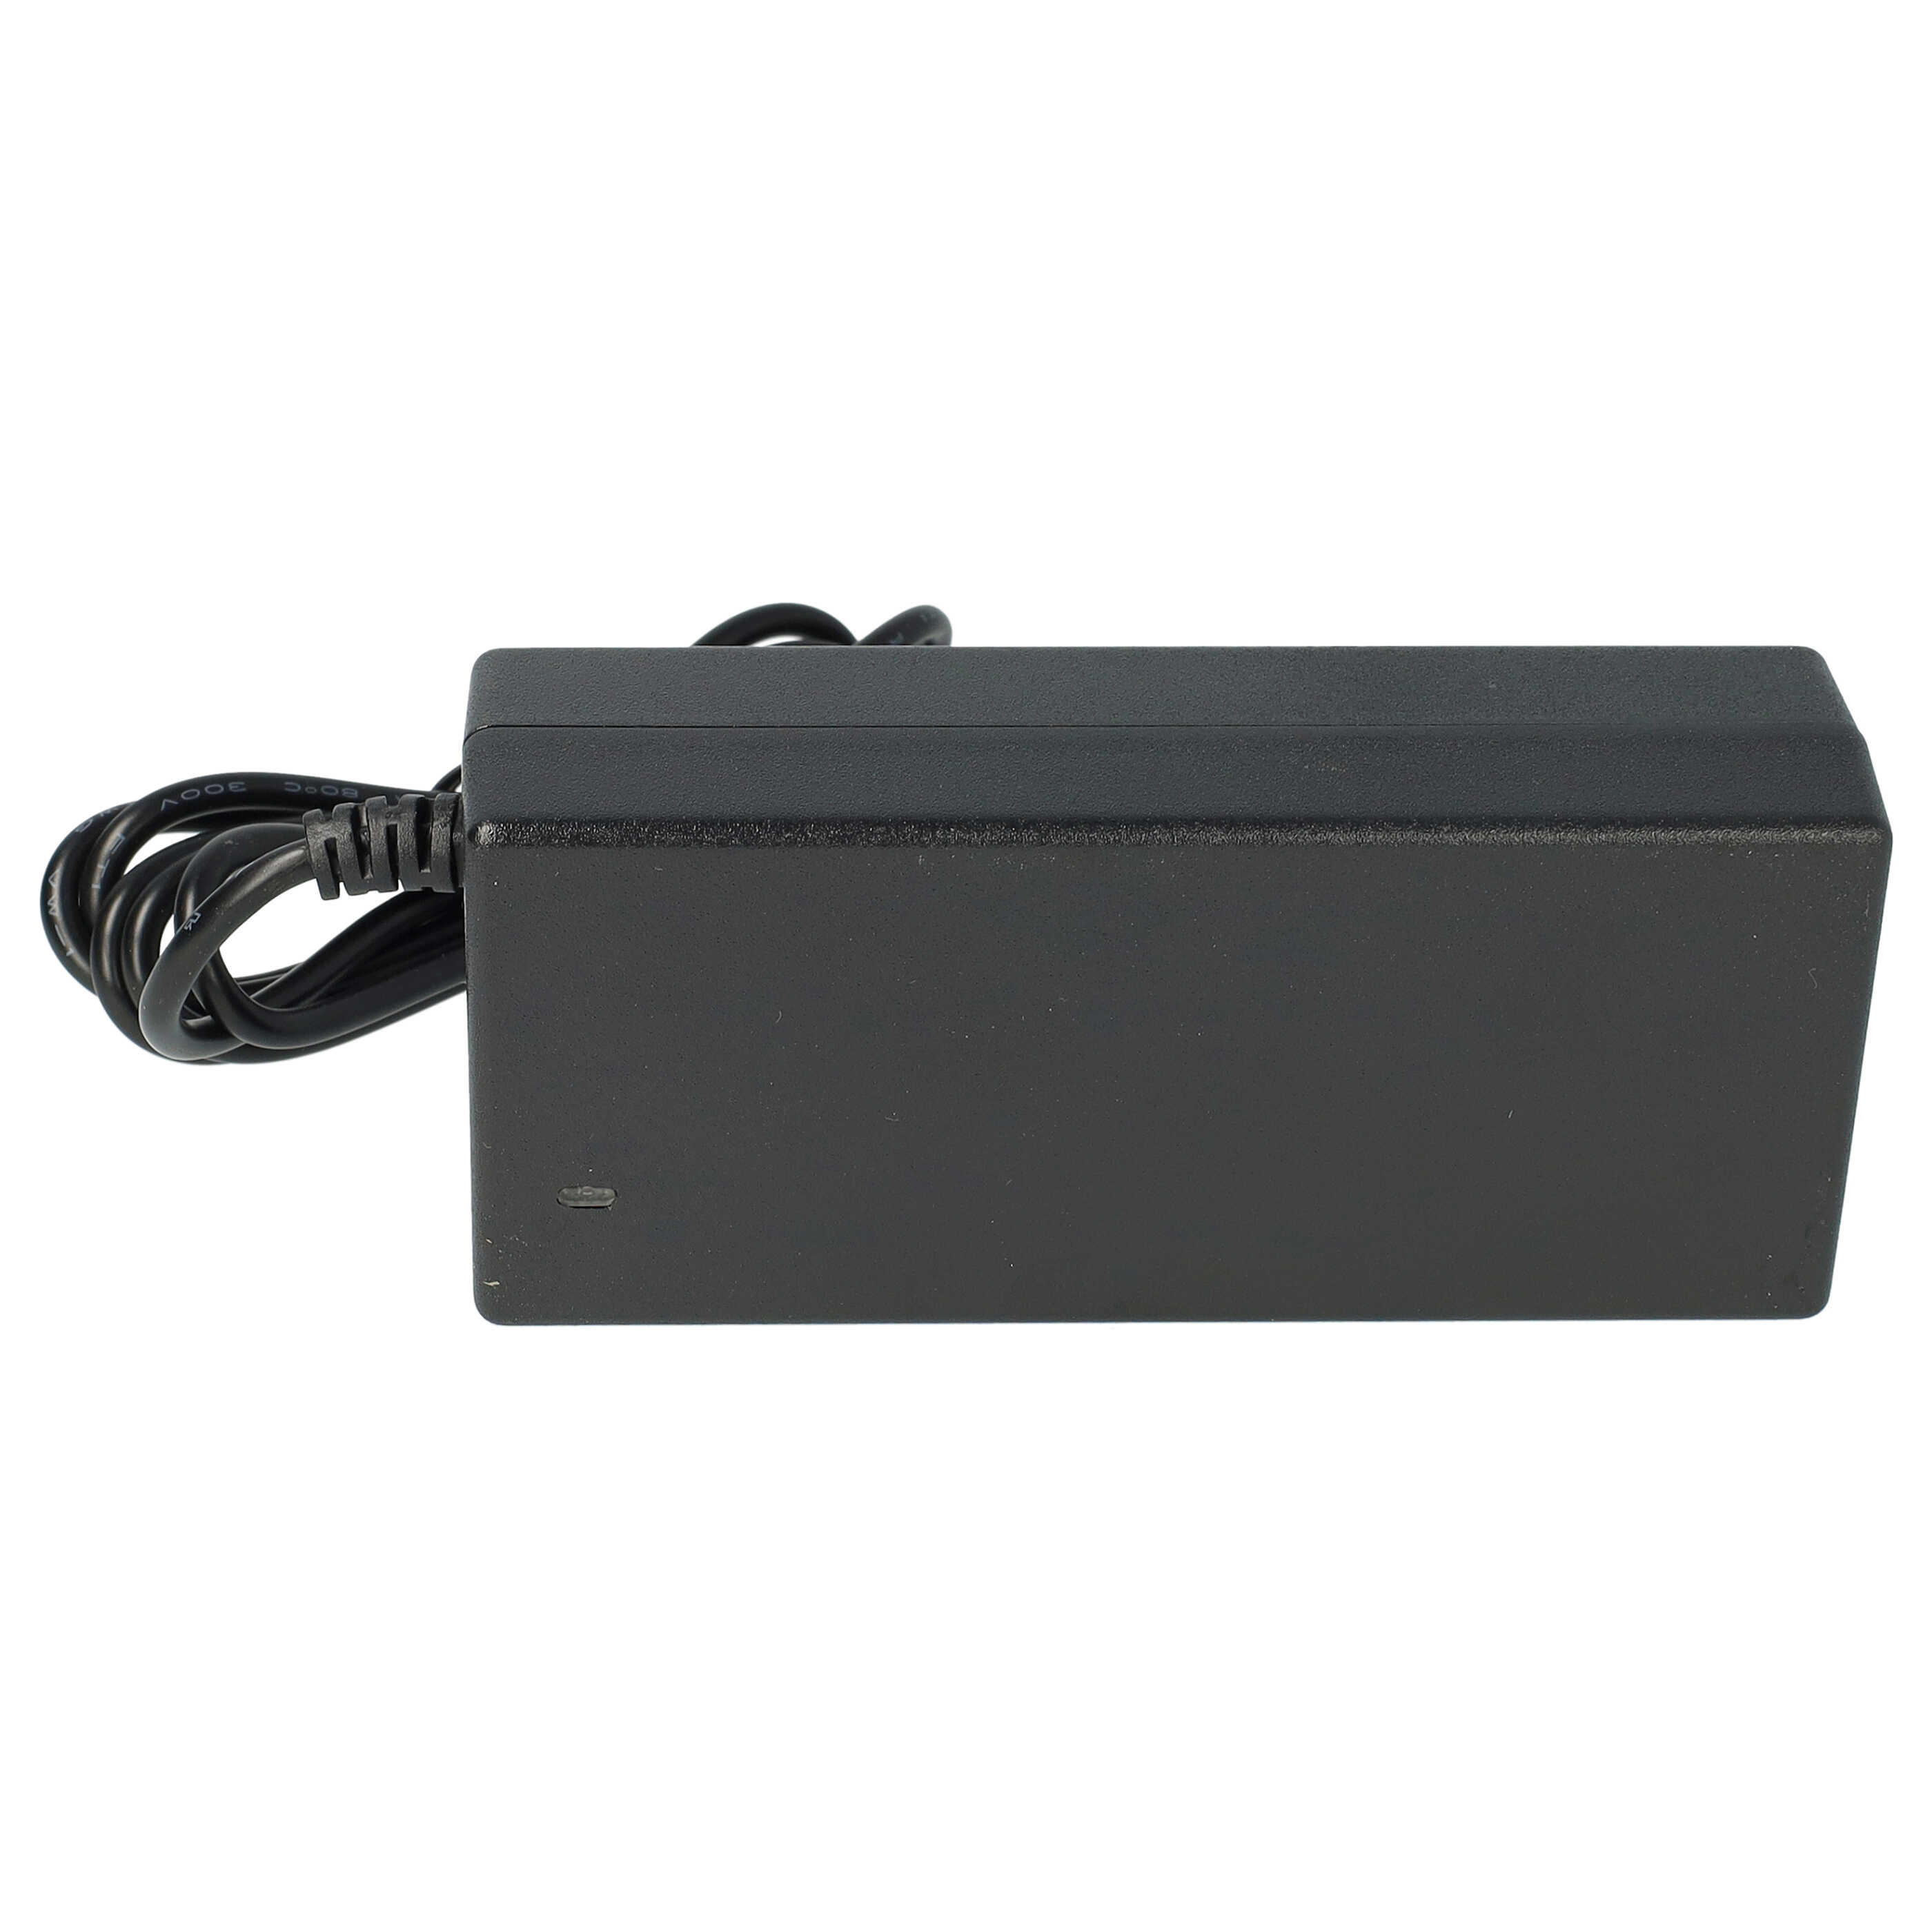 Mains Power Adapter with 5.5 x 2.1 mm Plug suitable for various Electric Devices - 24 V, 2 A